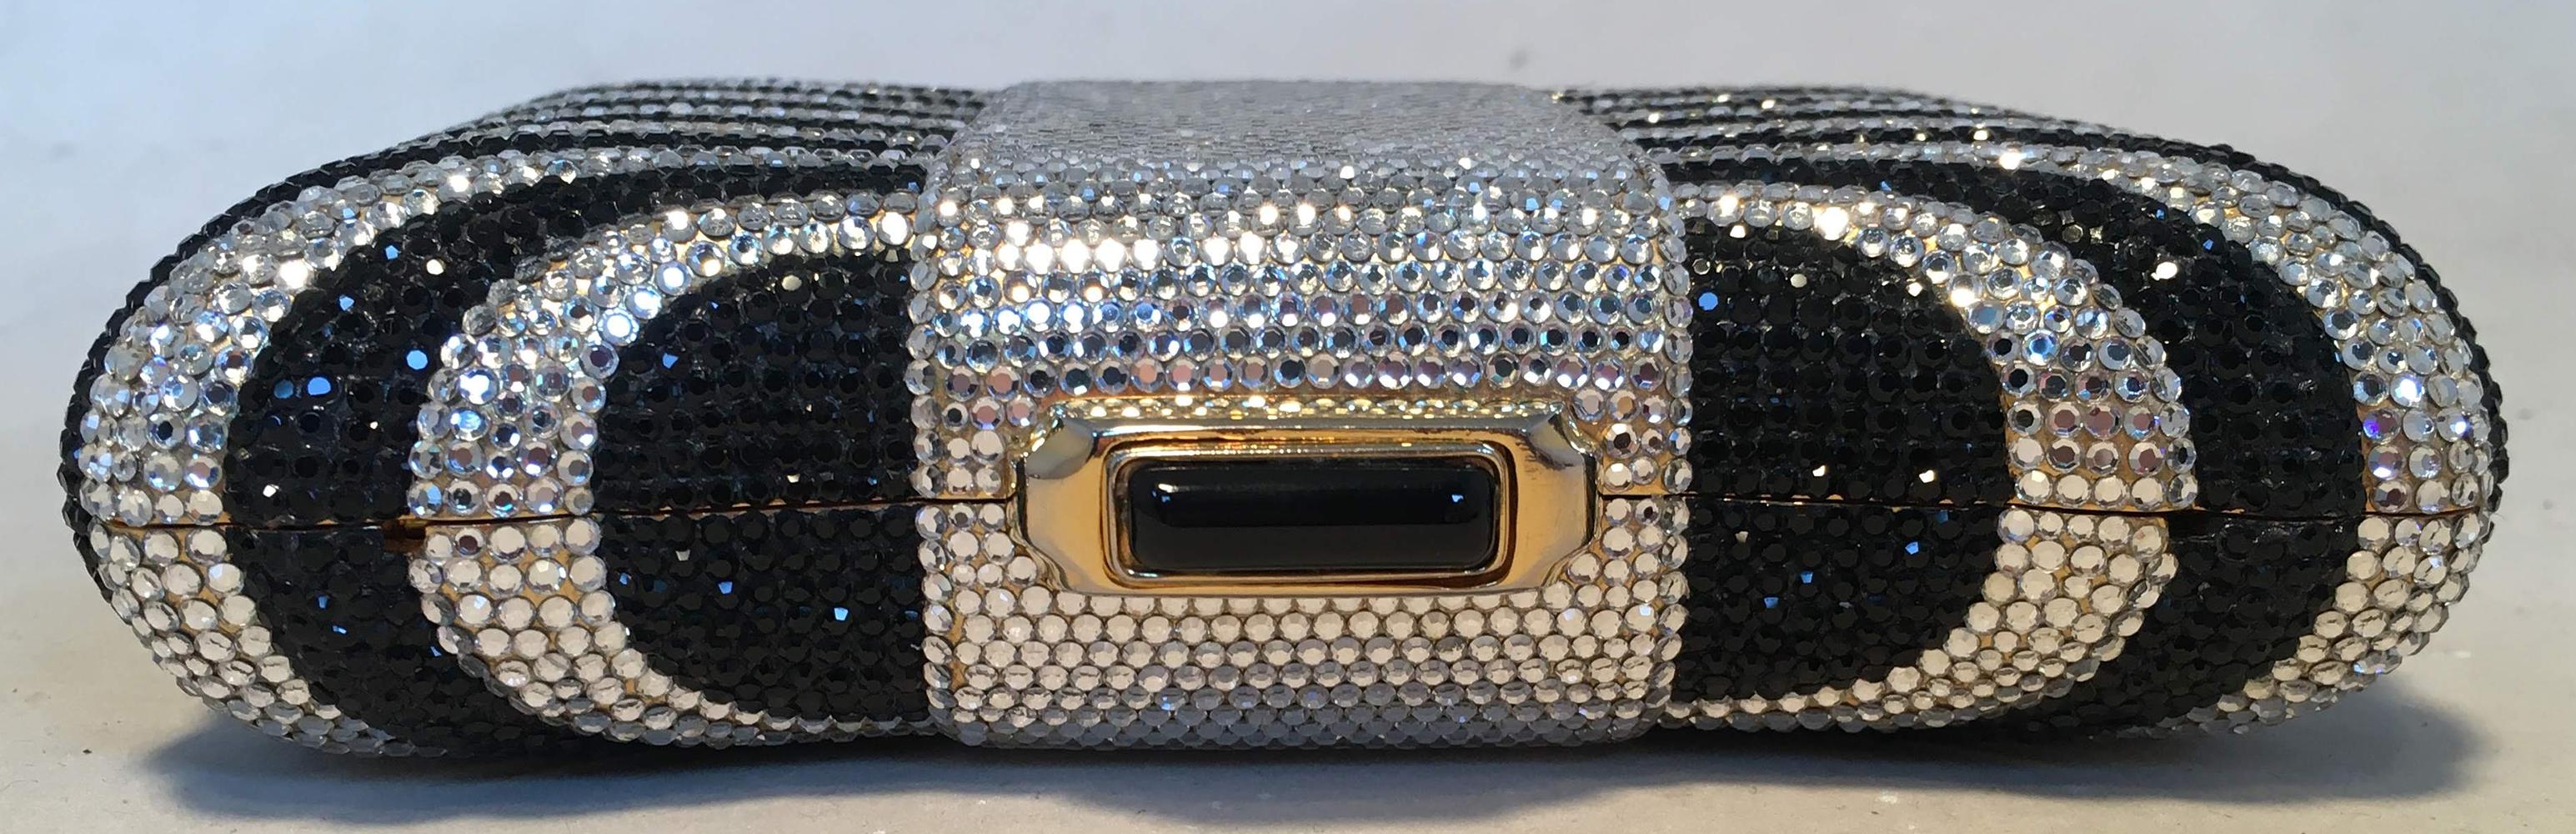 Judith Leiber Black and Silver Swarovski Crystal Minaudiere Evening Bag Clutch In Excellent Condition In Philadelphia, PA